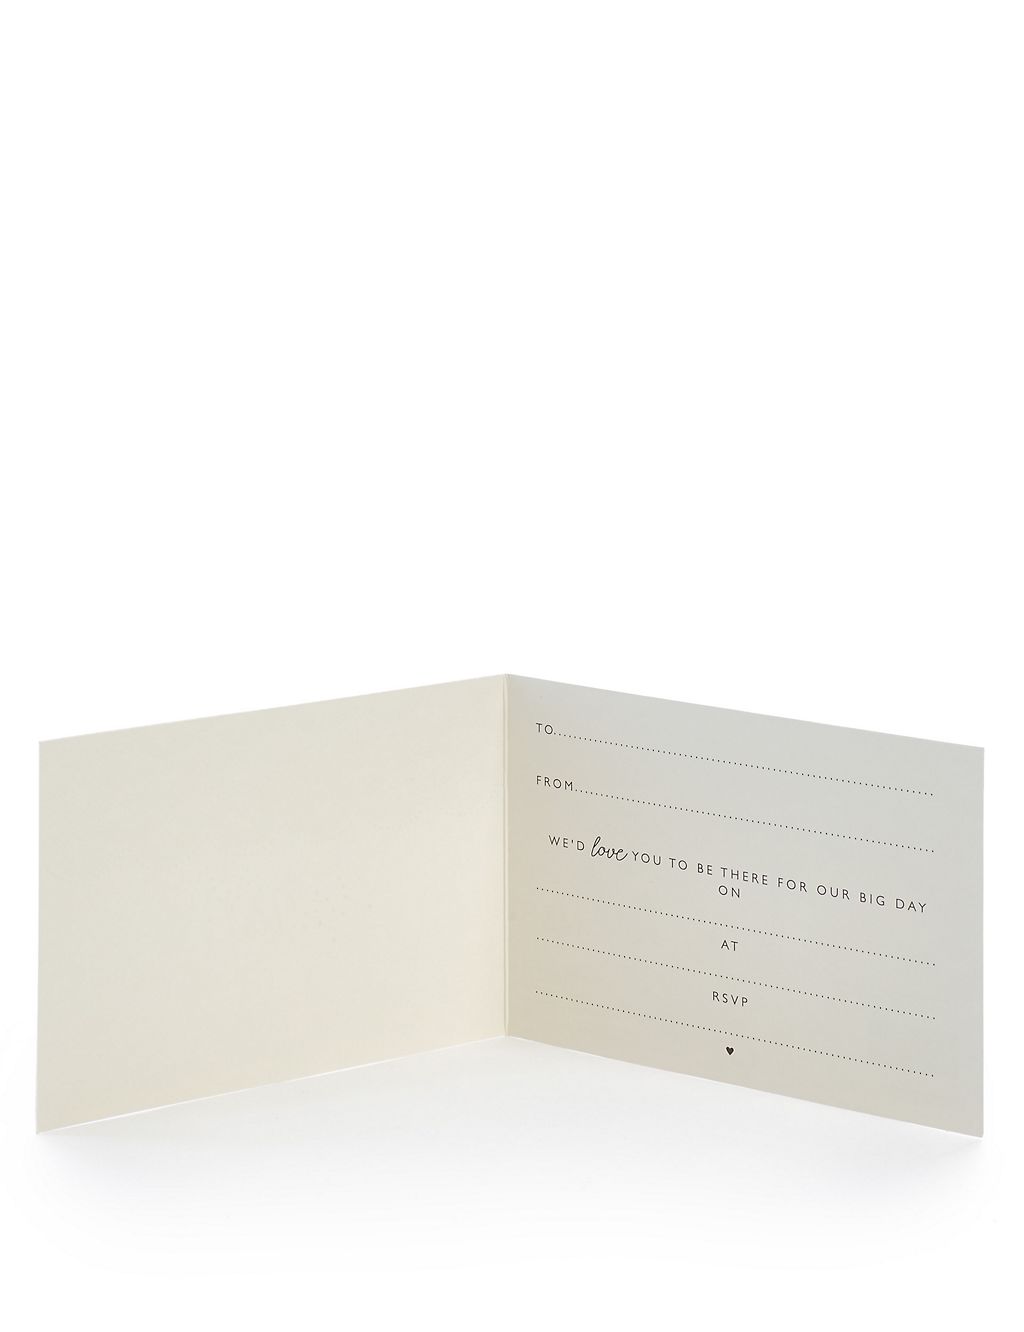 Pack of 8 Wedding Invitations 1 of 3